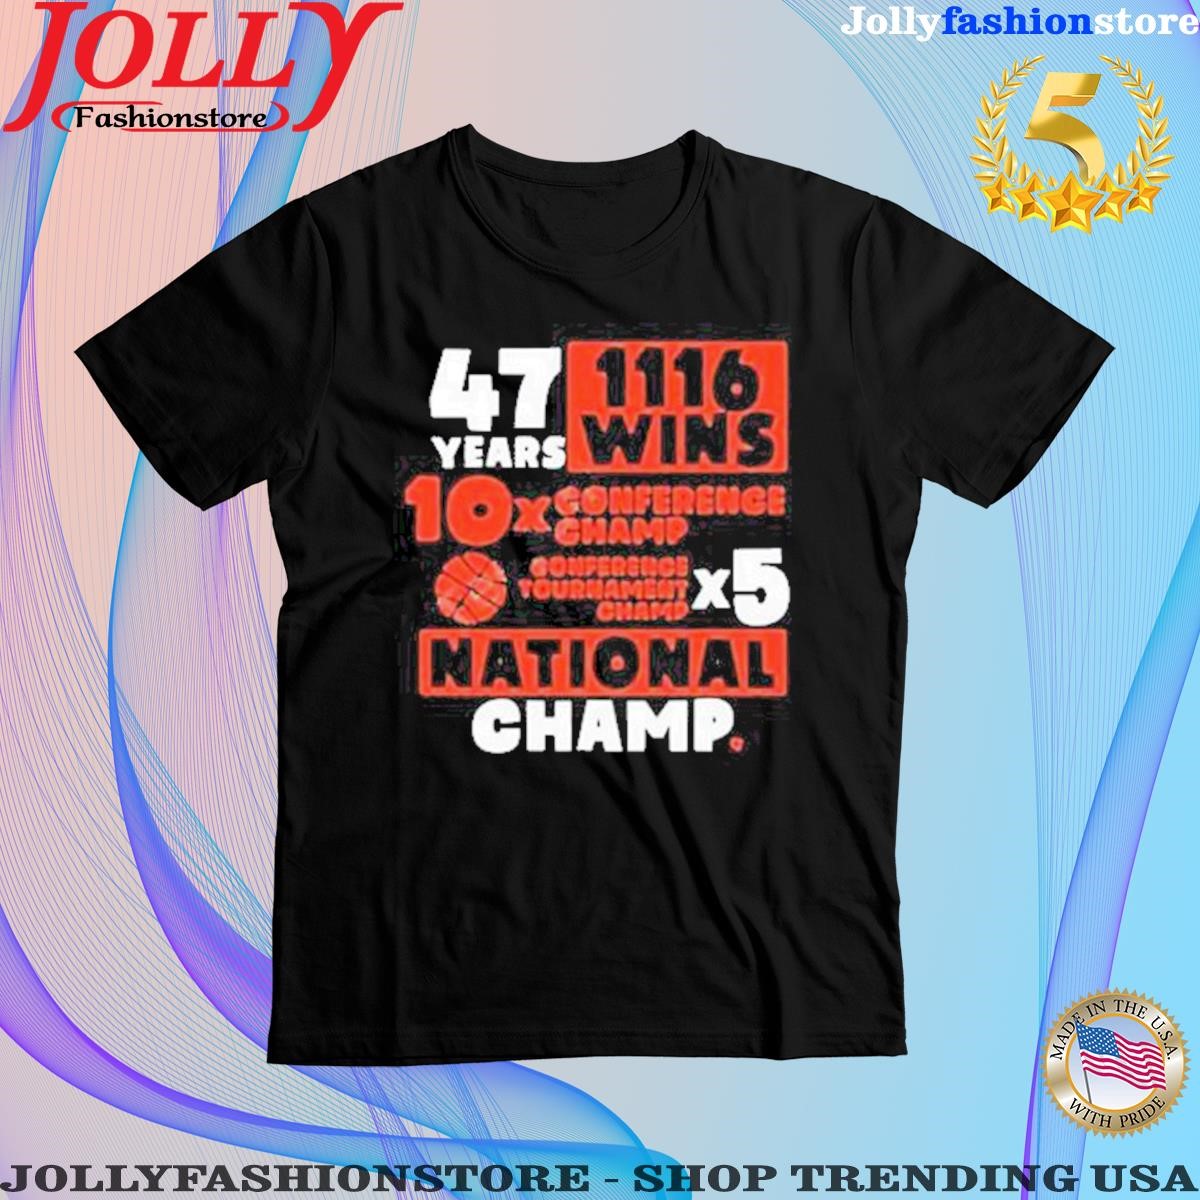 47 years 116 wins 10x conference champ 5x conference tournament champ national champ T-shirt